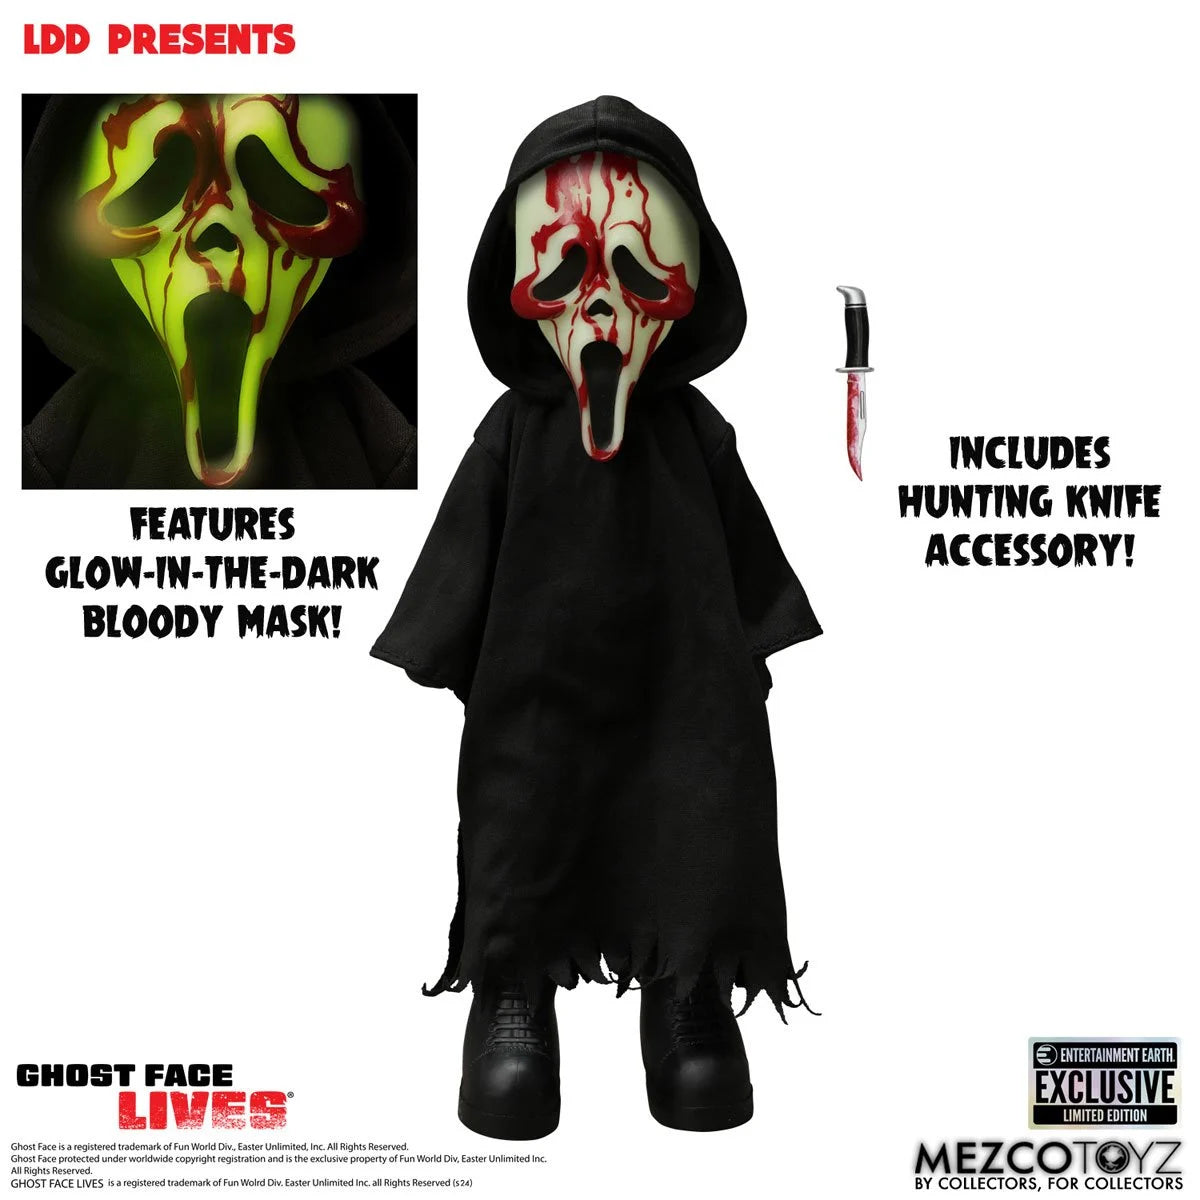 Living Dead Dolls Present Ghost Face Bloody Glow-in-the-Dark Edition 10-Inch Doll - Entertainment Earth Exclusive